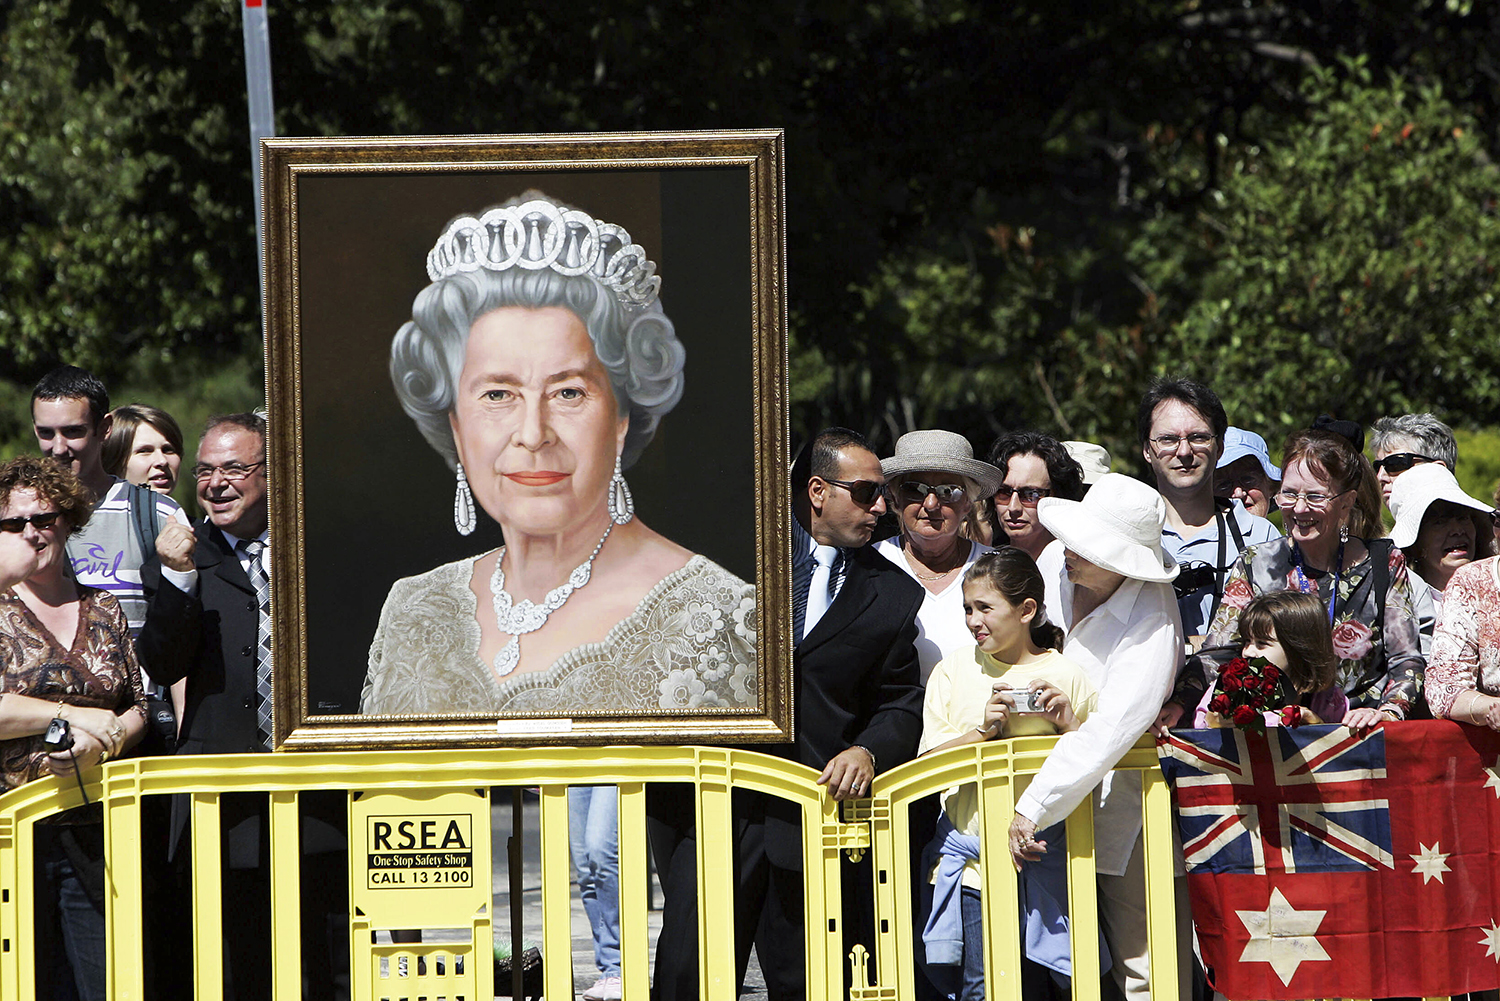 FILE - Wellwishers holding a portrait of Britain's Queen Elizabeth II wait for her arrival in Melbourne, Australia, Wednesday March 15, 2006. After seven decades on the throne, Queen Elizabeth II is widely viewed in the U.K. as a rock in turbulent times. But in Britain’s former colonies, many see her as an anchor to an imperial past whose damage still lingers. (AP Photo/Rick Stevens, File)